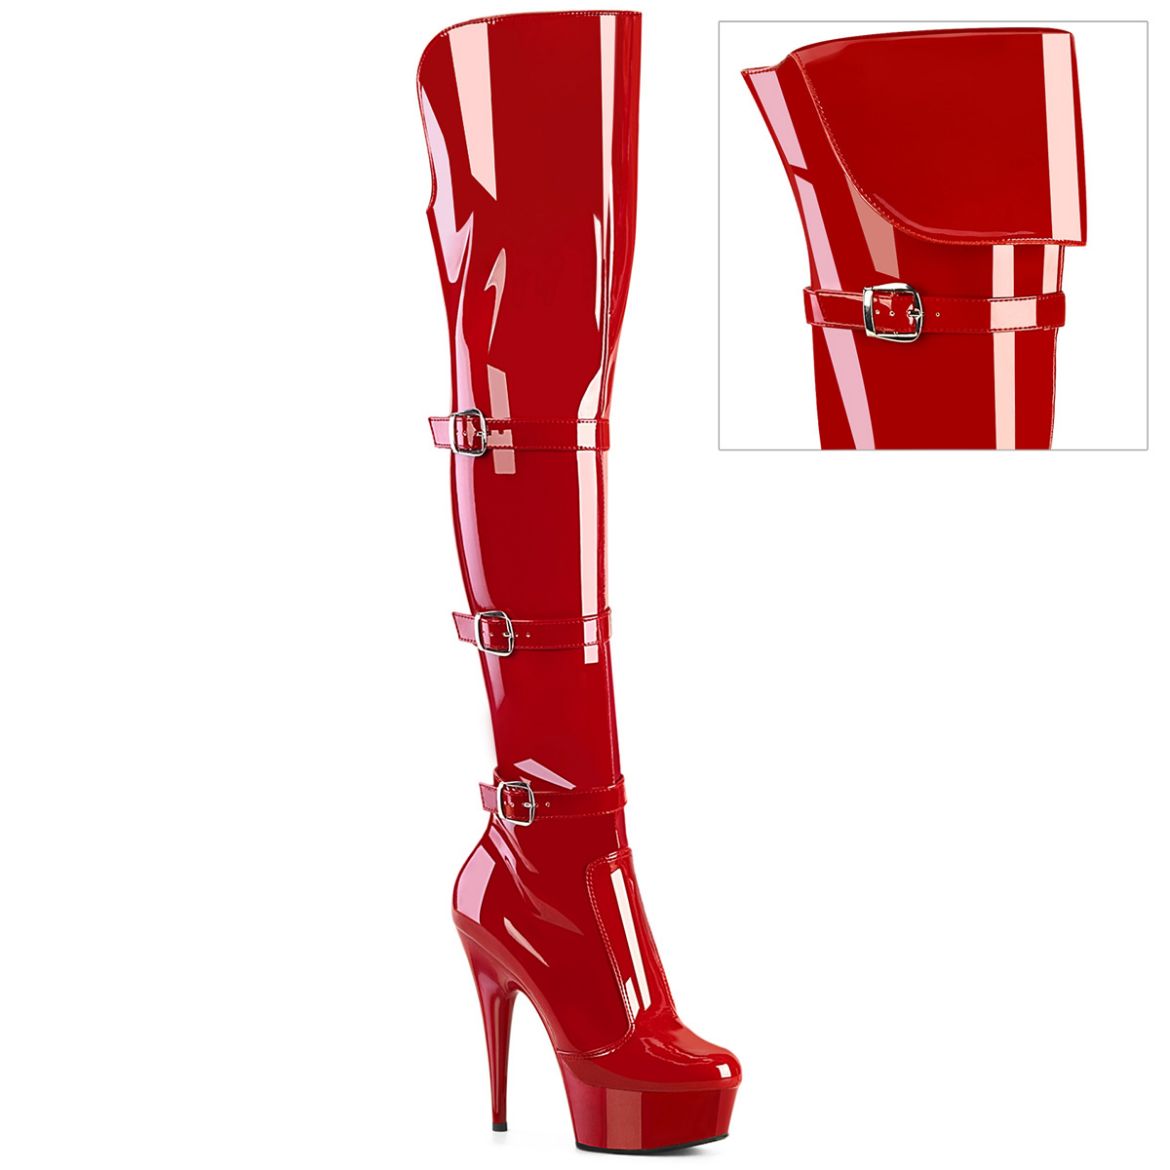 Product image of Pleaser DELIGHT-3018 Red Str. Pat/Red 6 Inch Heel 1 3/4 Inch PF Triple Buckle Strap OTK Boot Side Zip